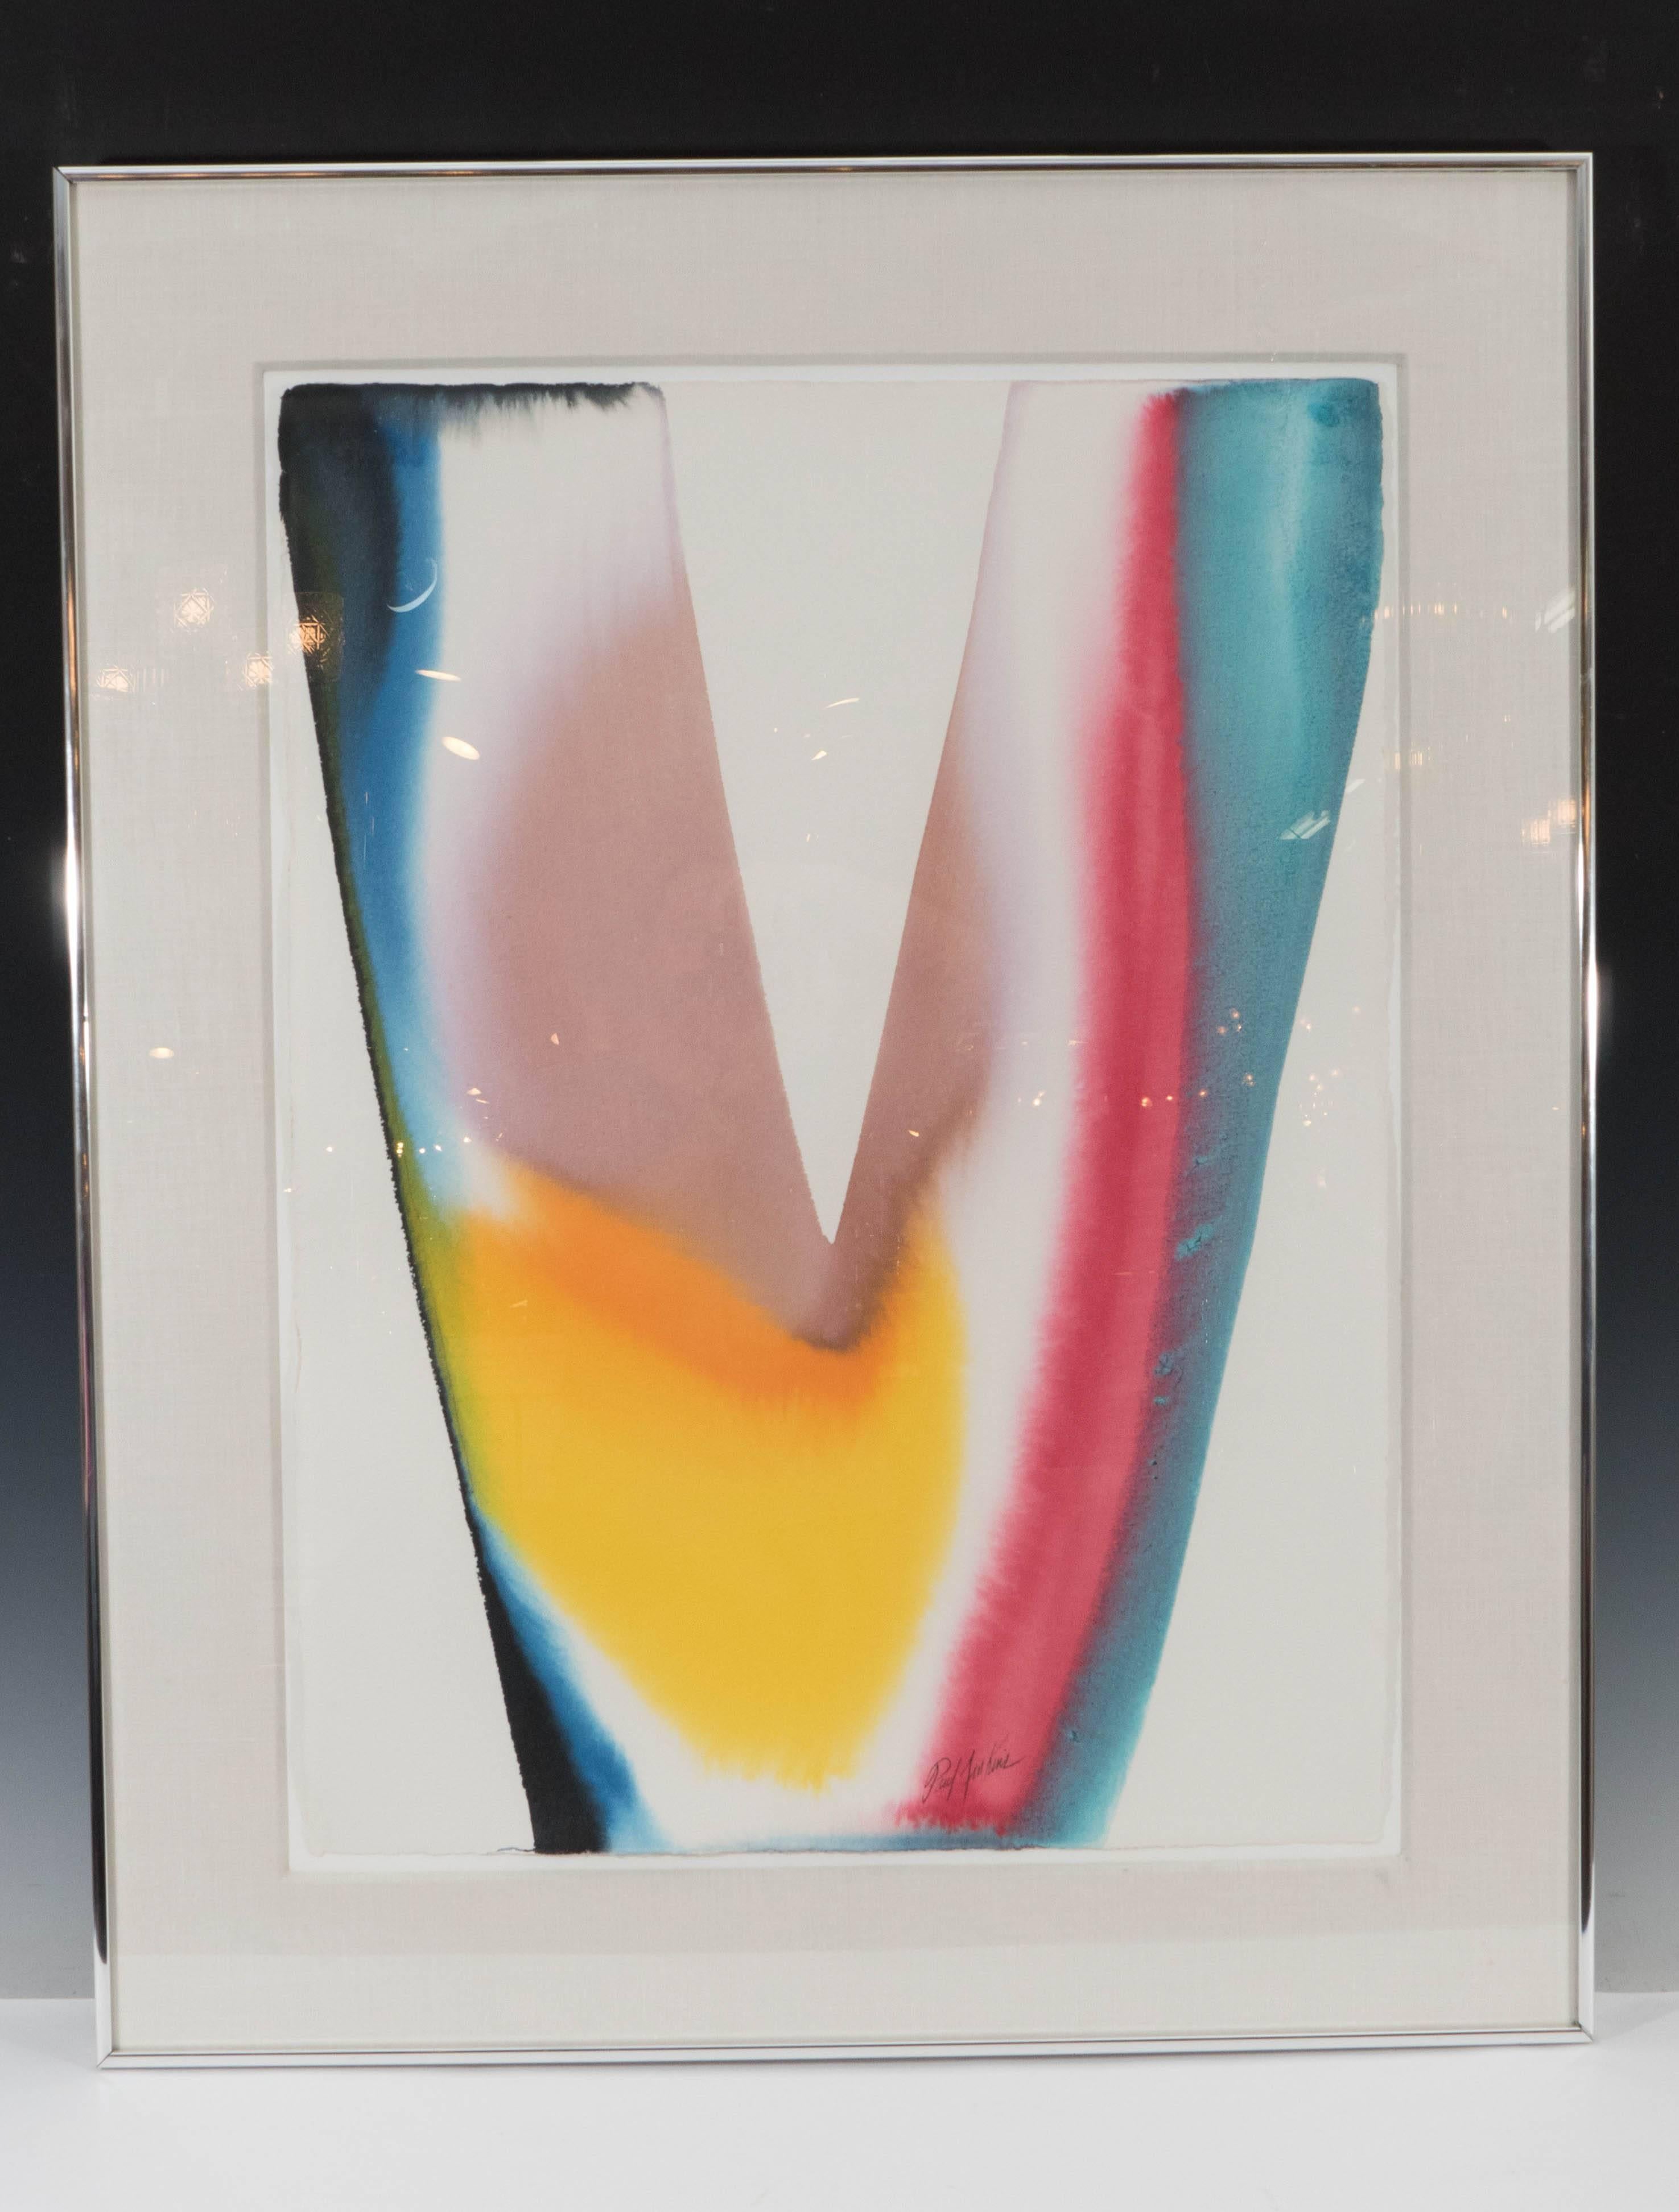 Paul Jenkins (1923-2012).
Watercolor on paper.
Signed on bottom.
Framed: 39” H x 31.25” W x 1.5” D
Sight: 30” H x 22.5” W

Paul Jenkins, born 1923 in Kansas City, Missouri , dedicated much of his youth to the arts field, beginning as a student